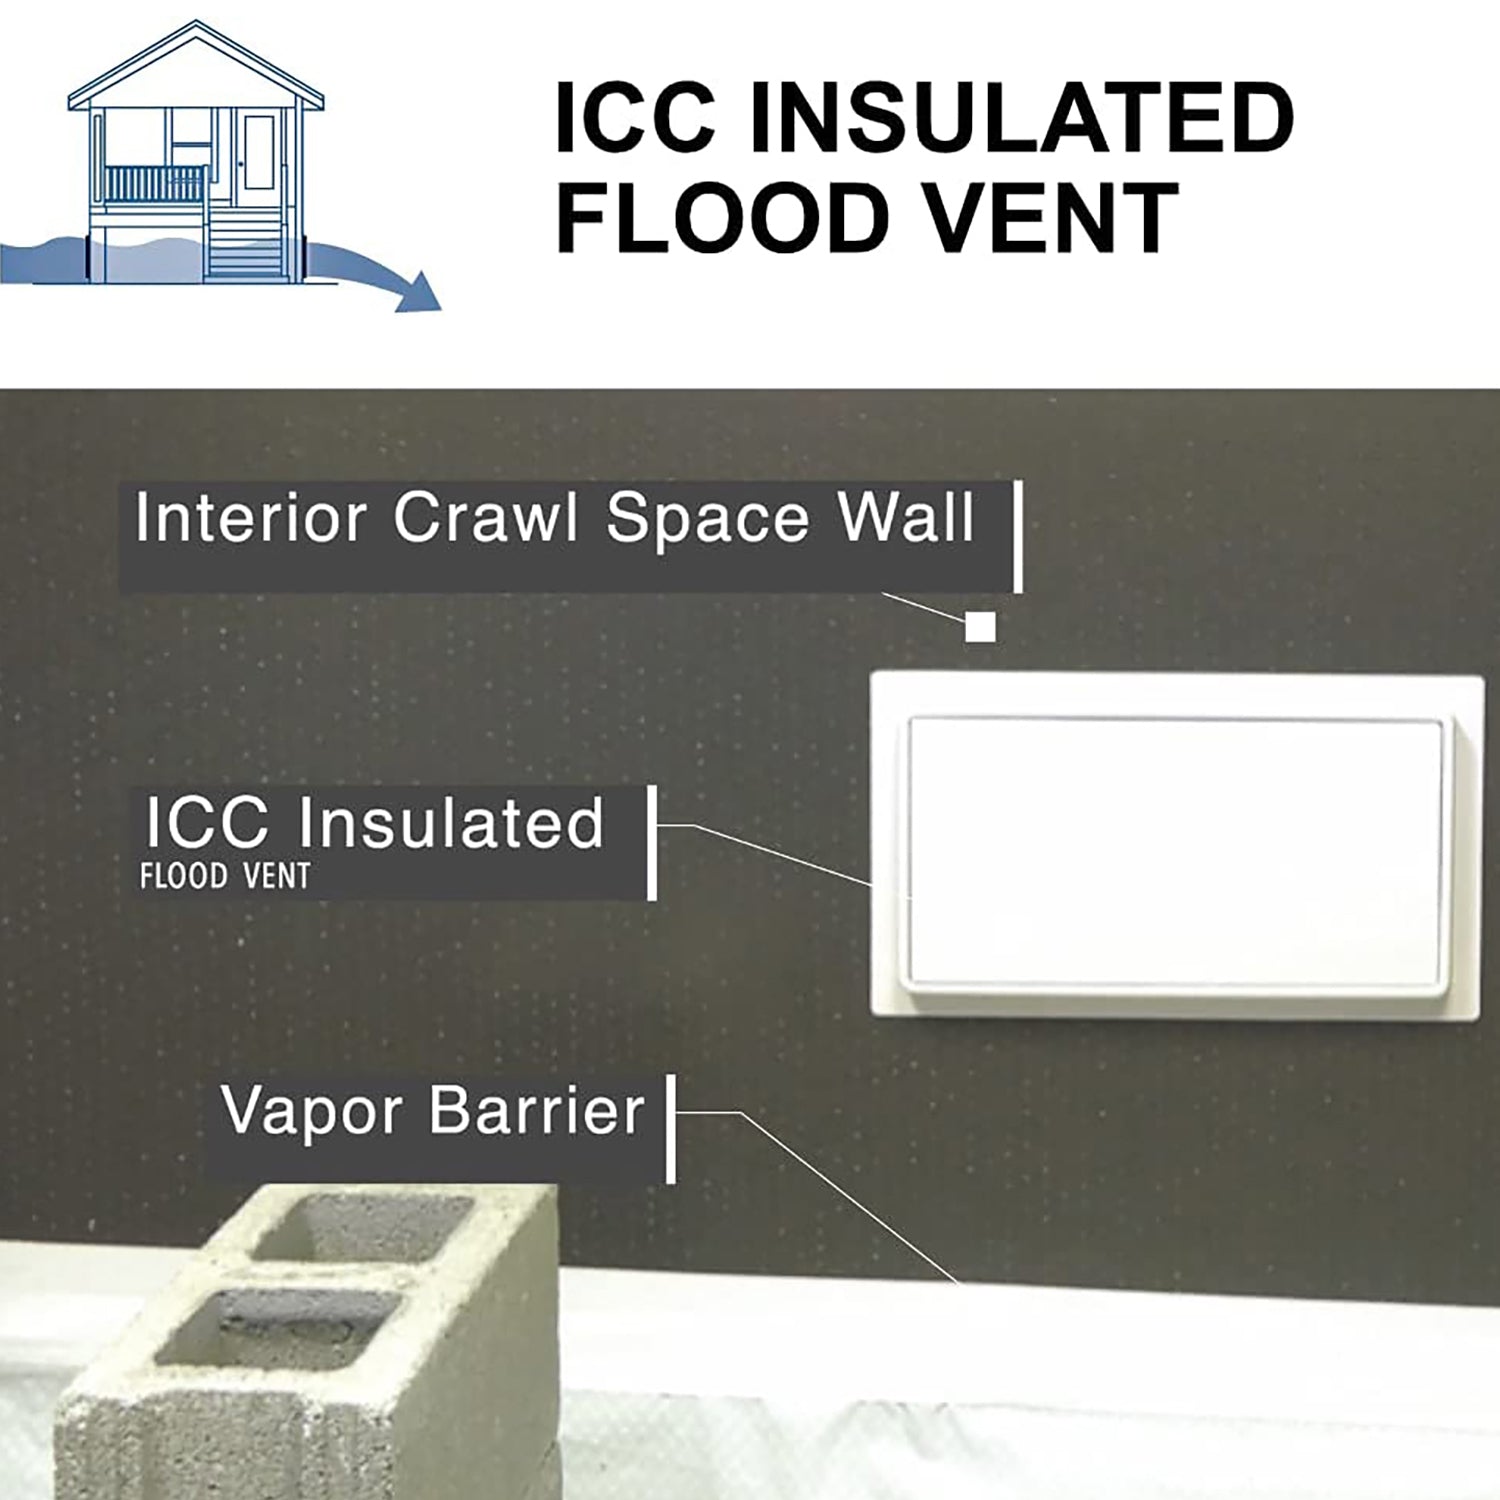 Placement of flood vent